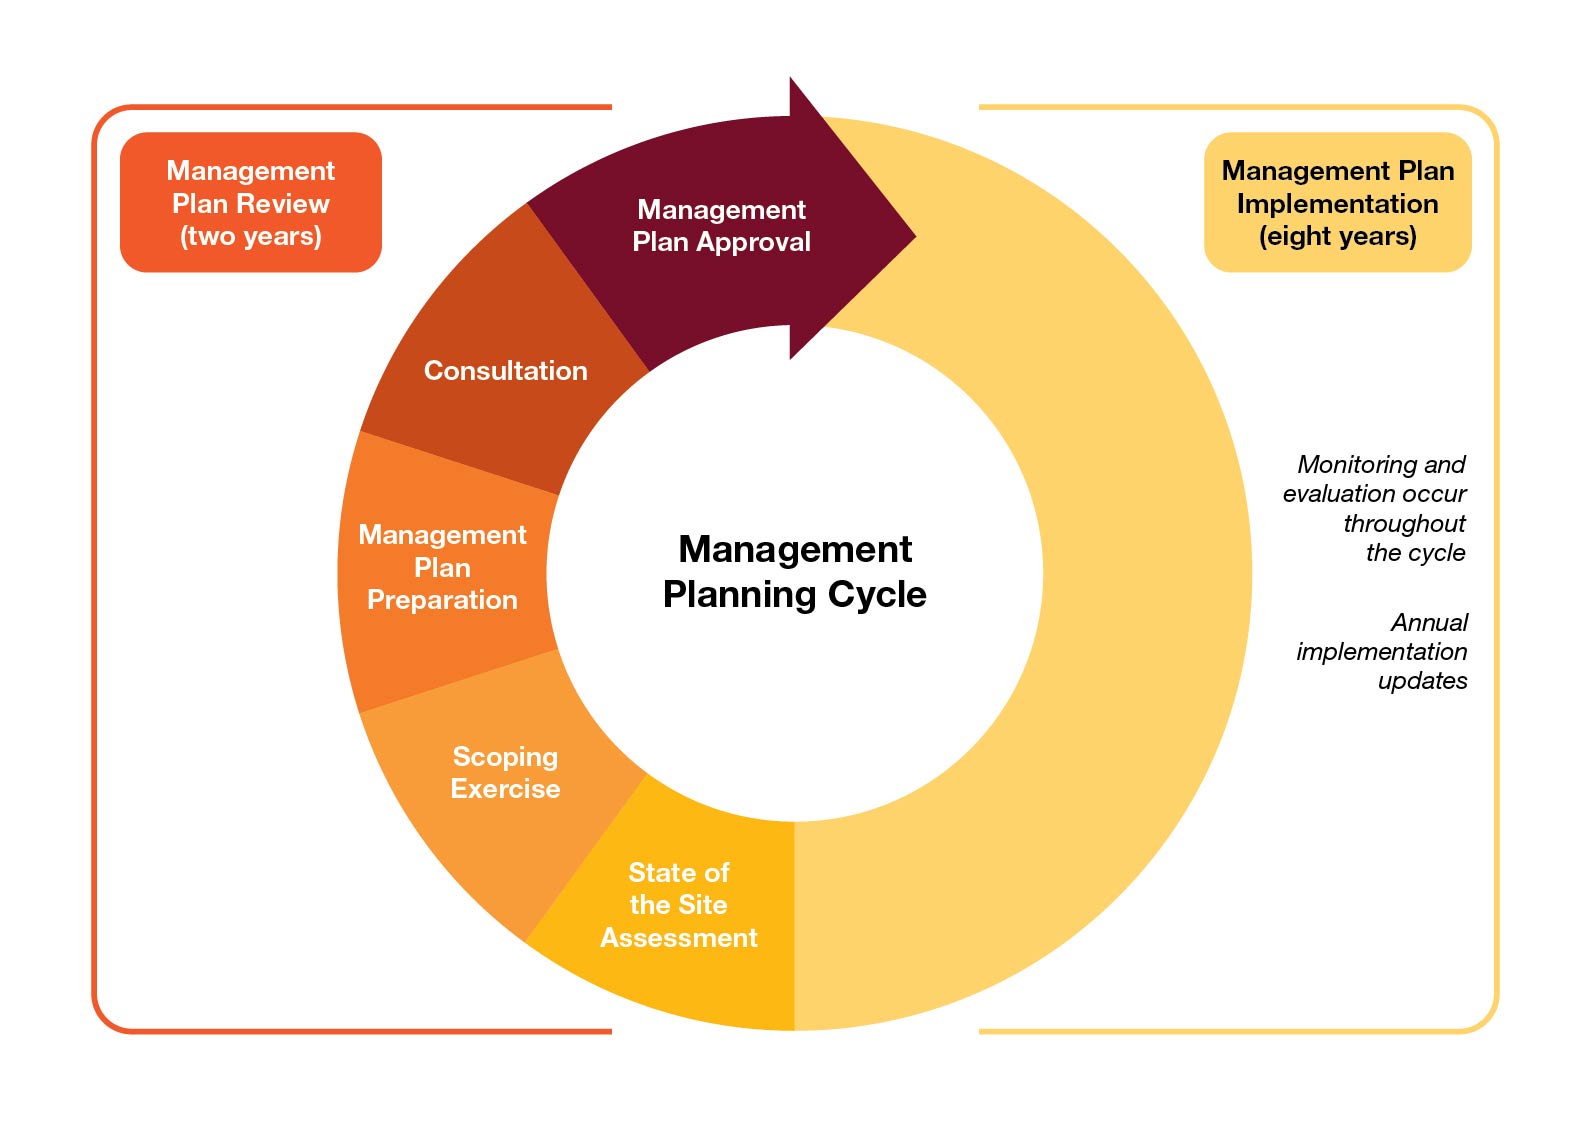 Management planning cycle - Management plan review (two years) 1) State of the Park assessment 2) Scoping exercise 3) Management plan preparation 4) Consultation 5) Management plan approval  - Management plan implementation (eight years) 1) Monitoring and evaluation occur throughout the cycle 2) Annual implementation updates